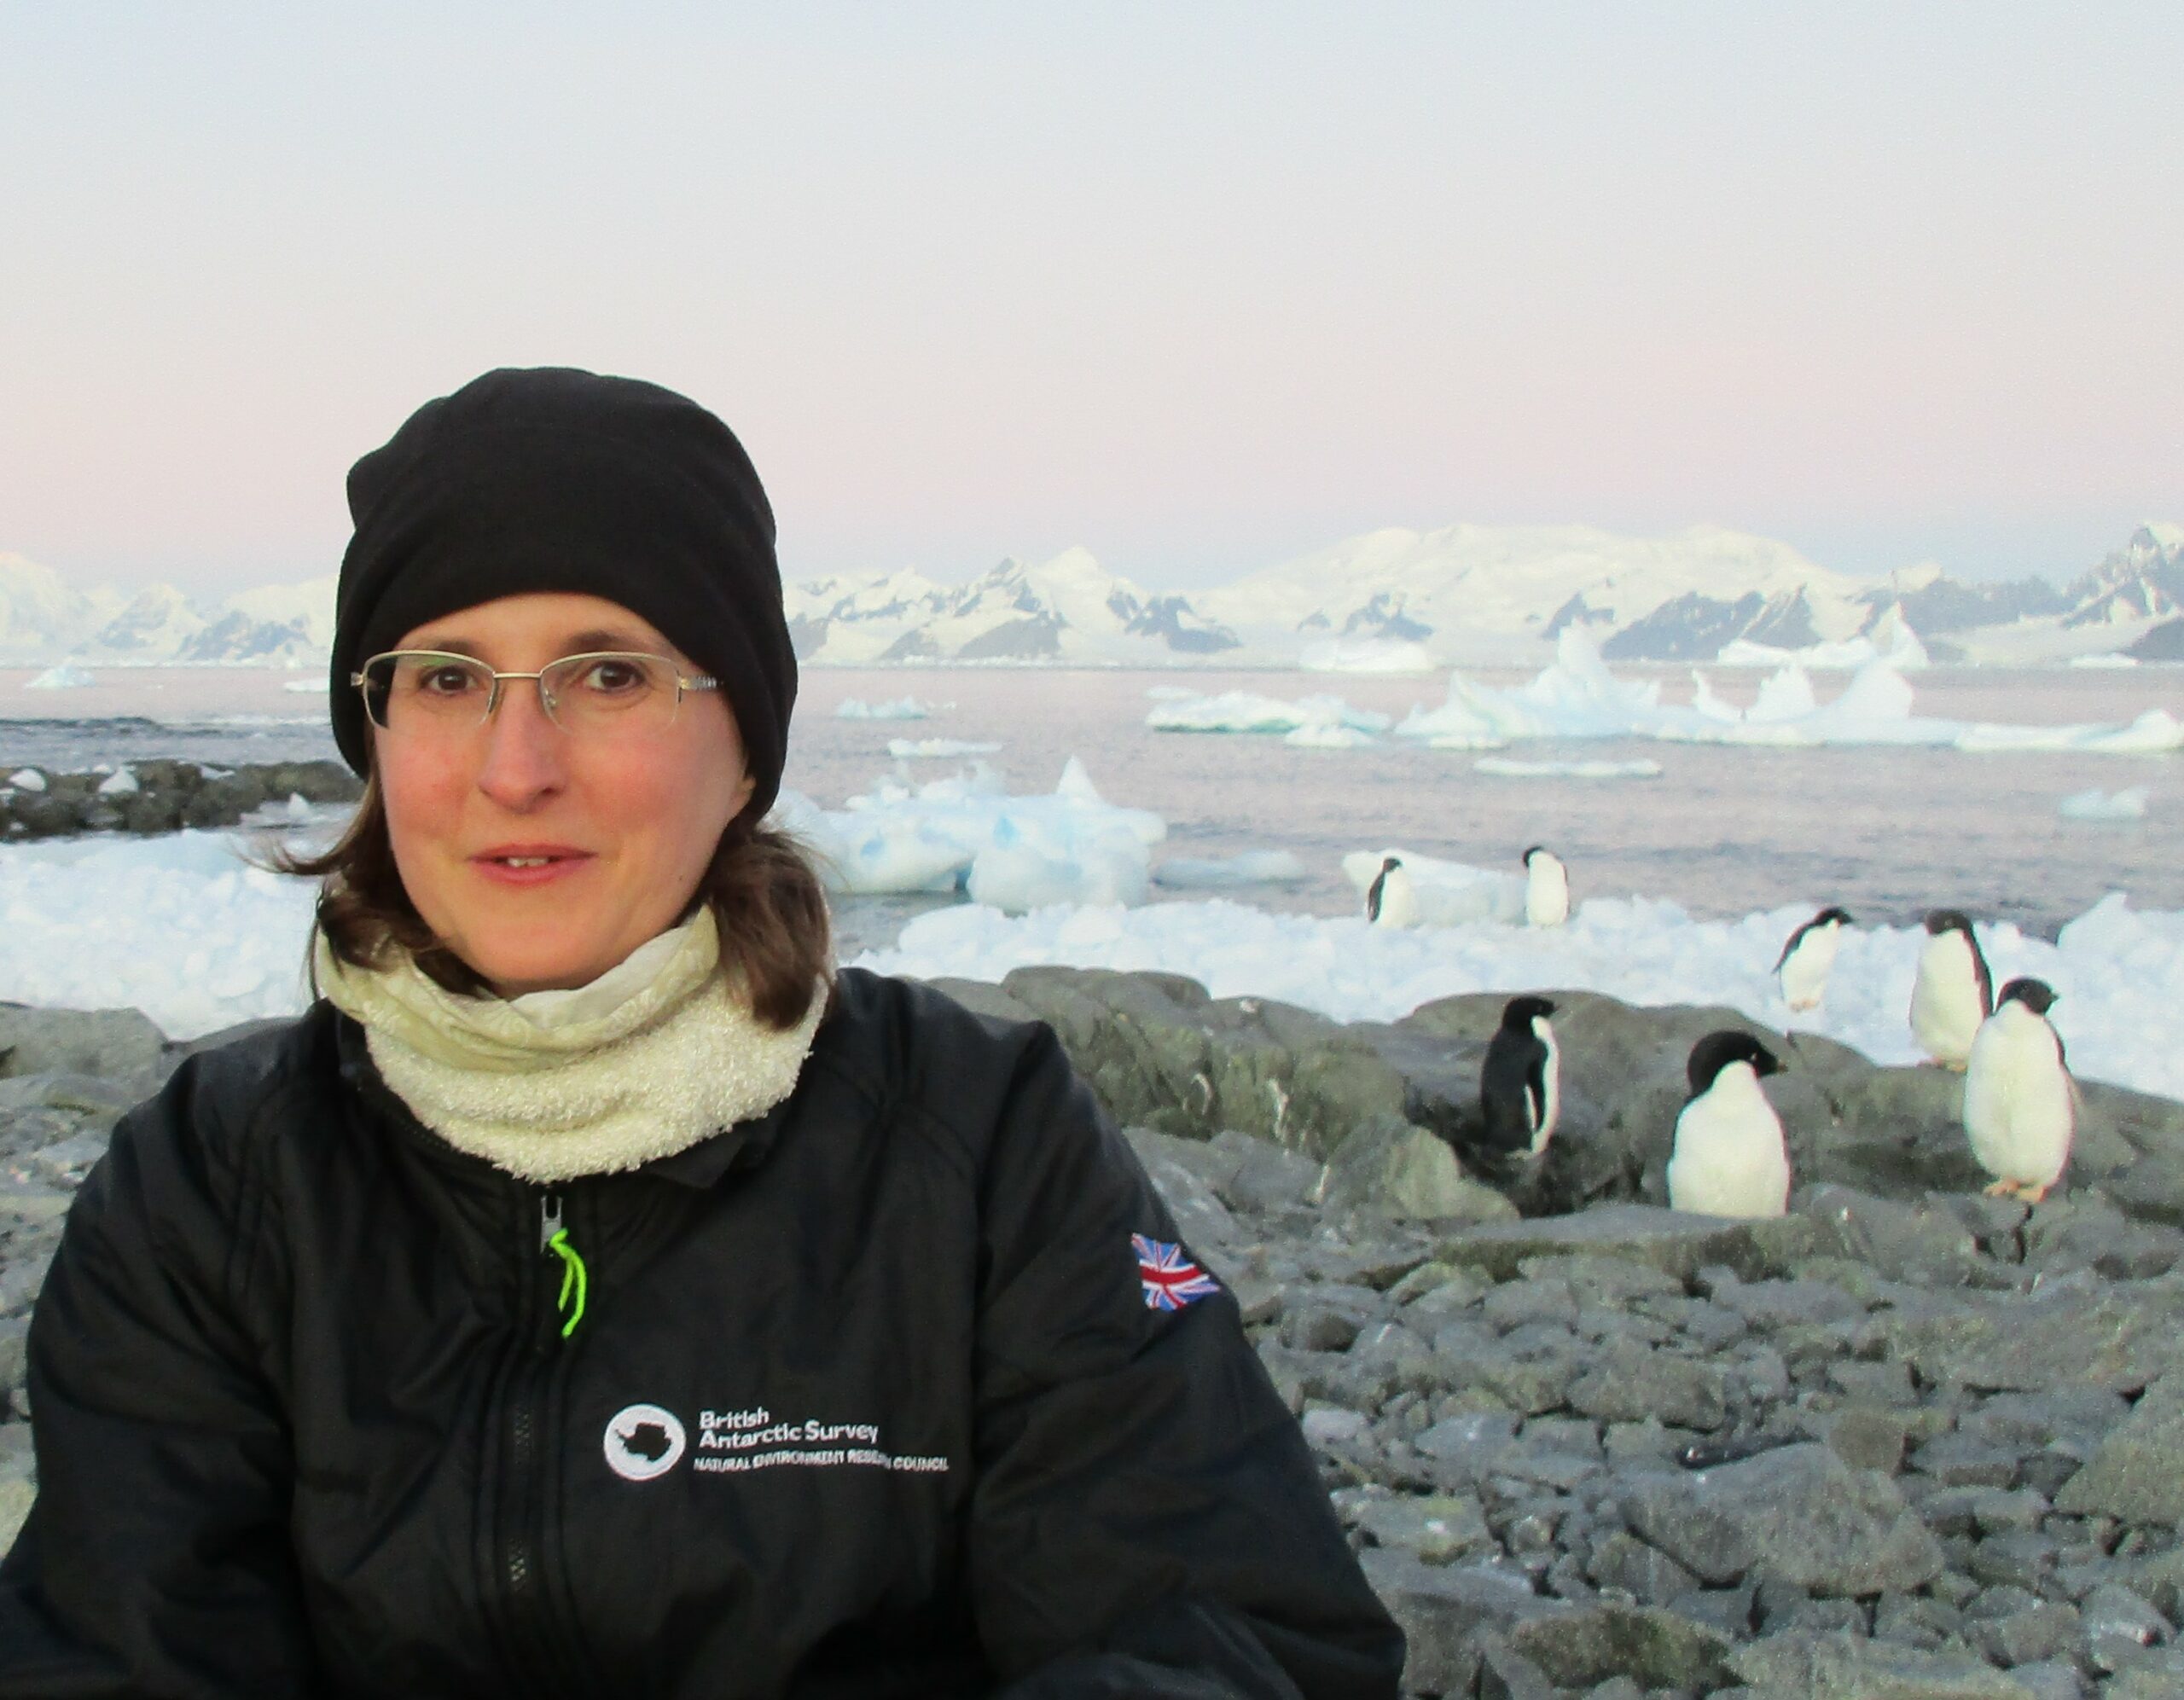 Tracy Moffat-Griffin at Rothera Research Station with Adelie penguins